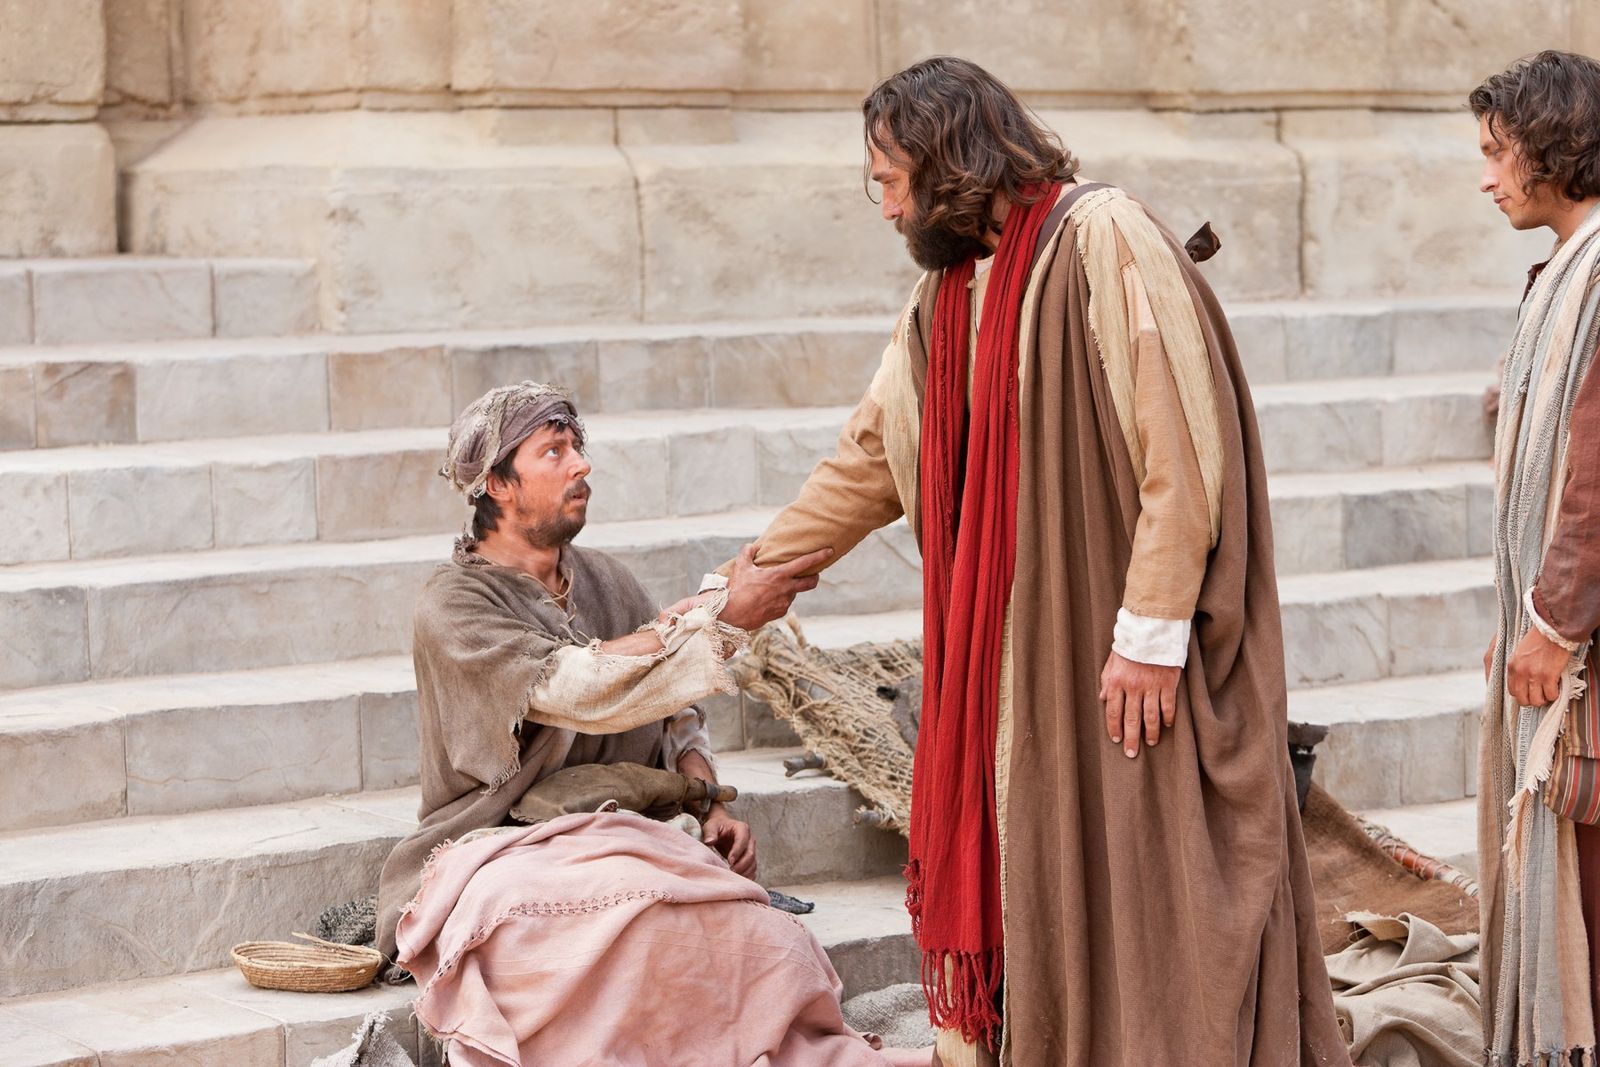 Peter reaches out his hand to a crippled man and commands him to rise and walk.